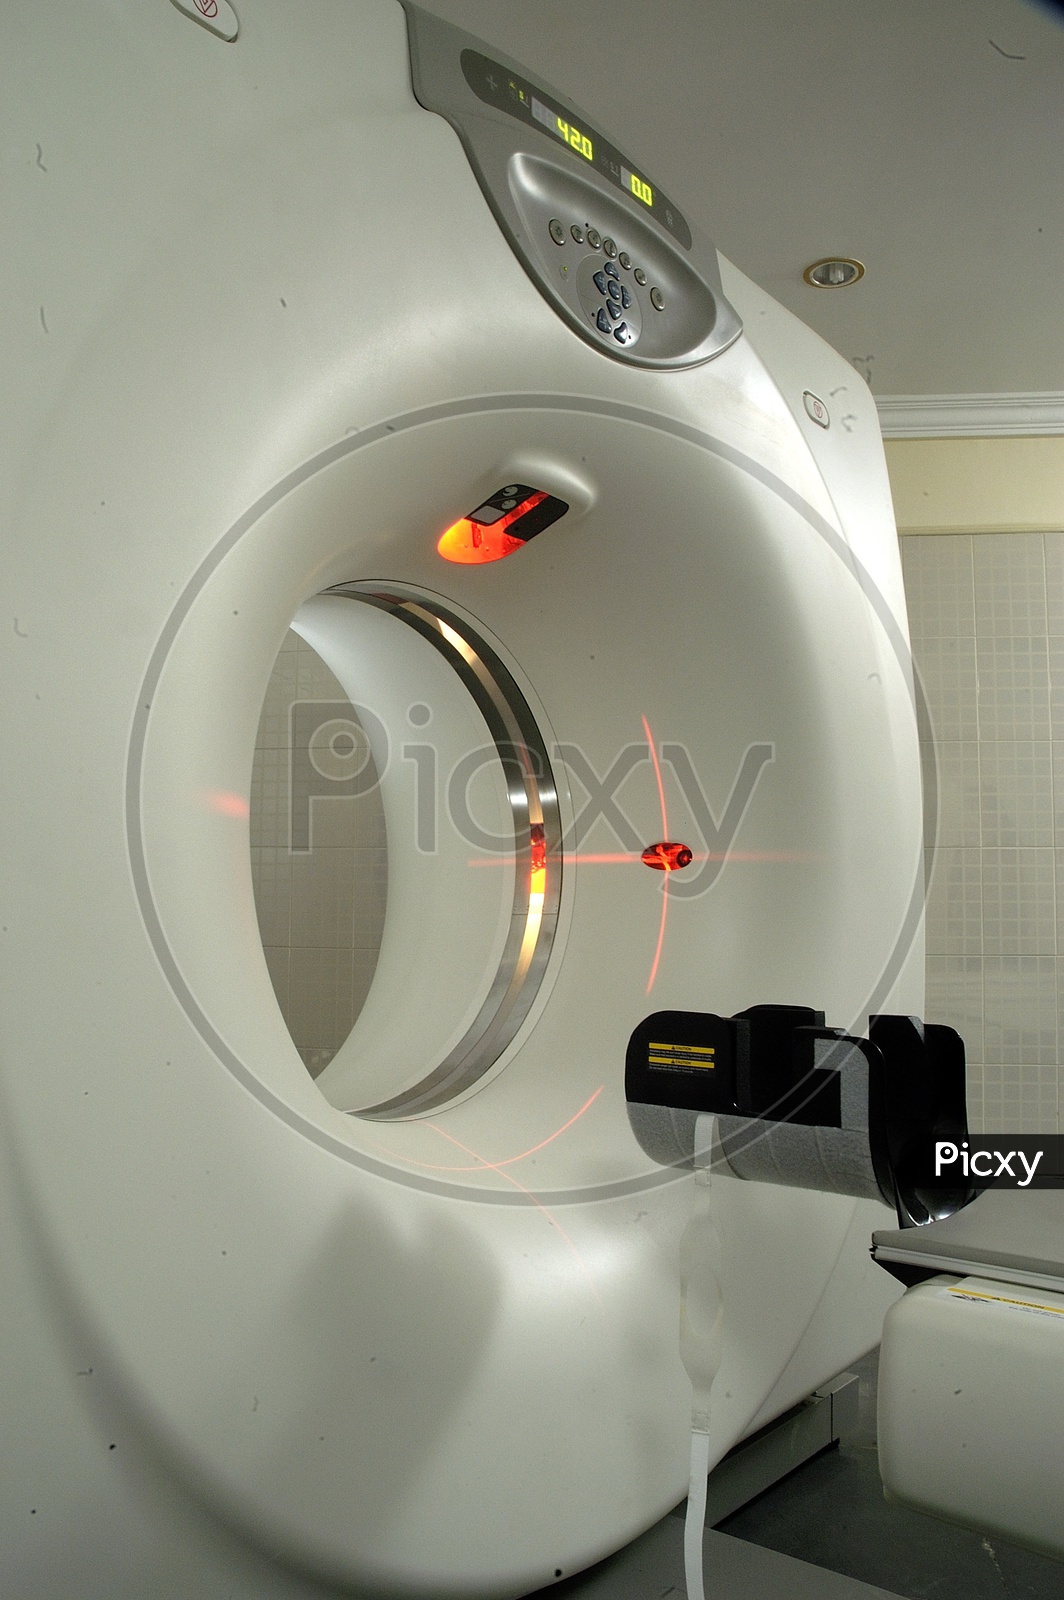 CT - Computerized Tomography Scan Device in Hospital